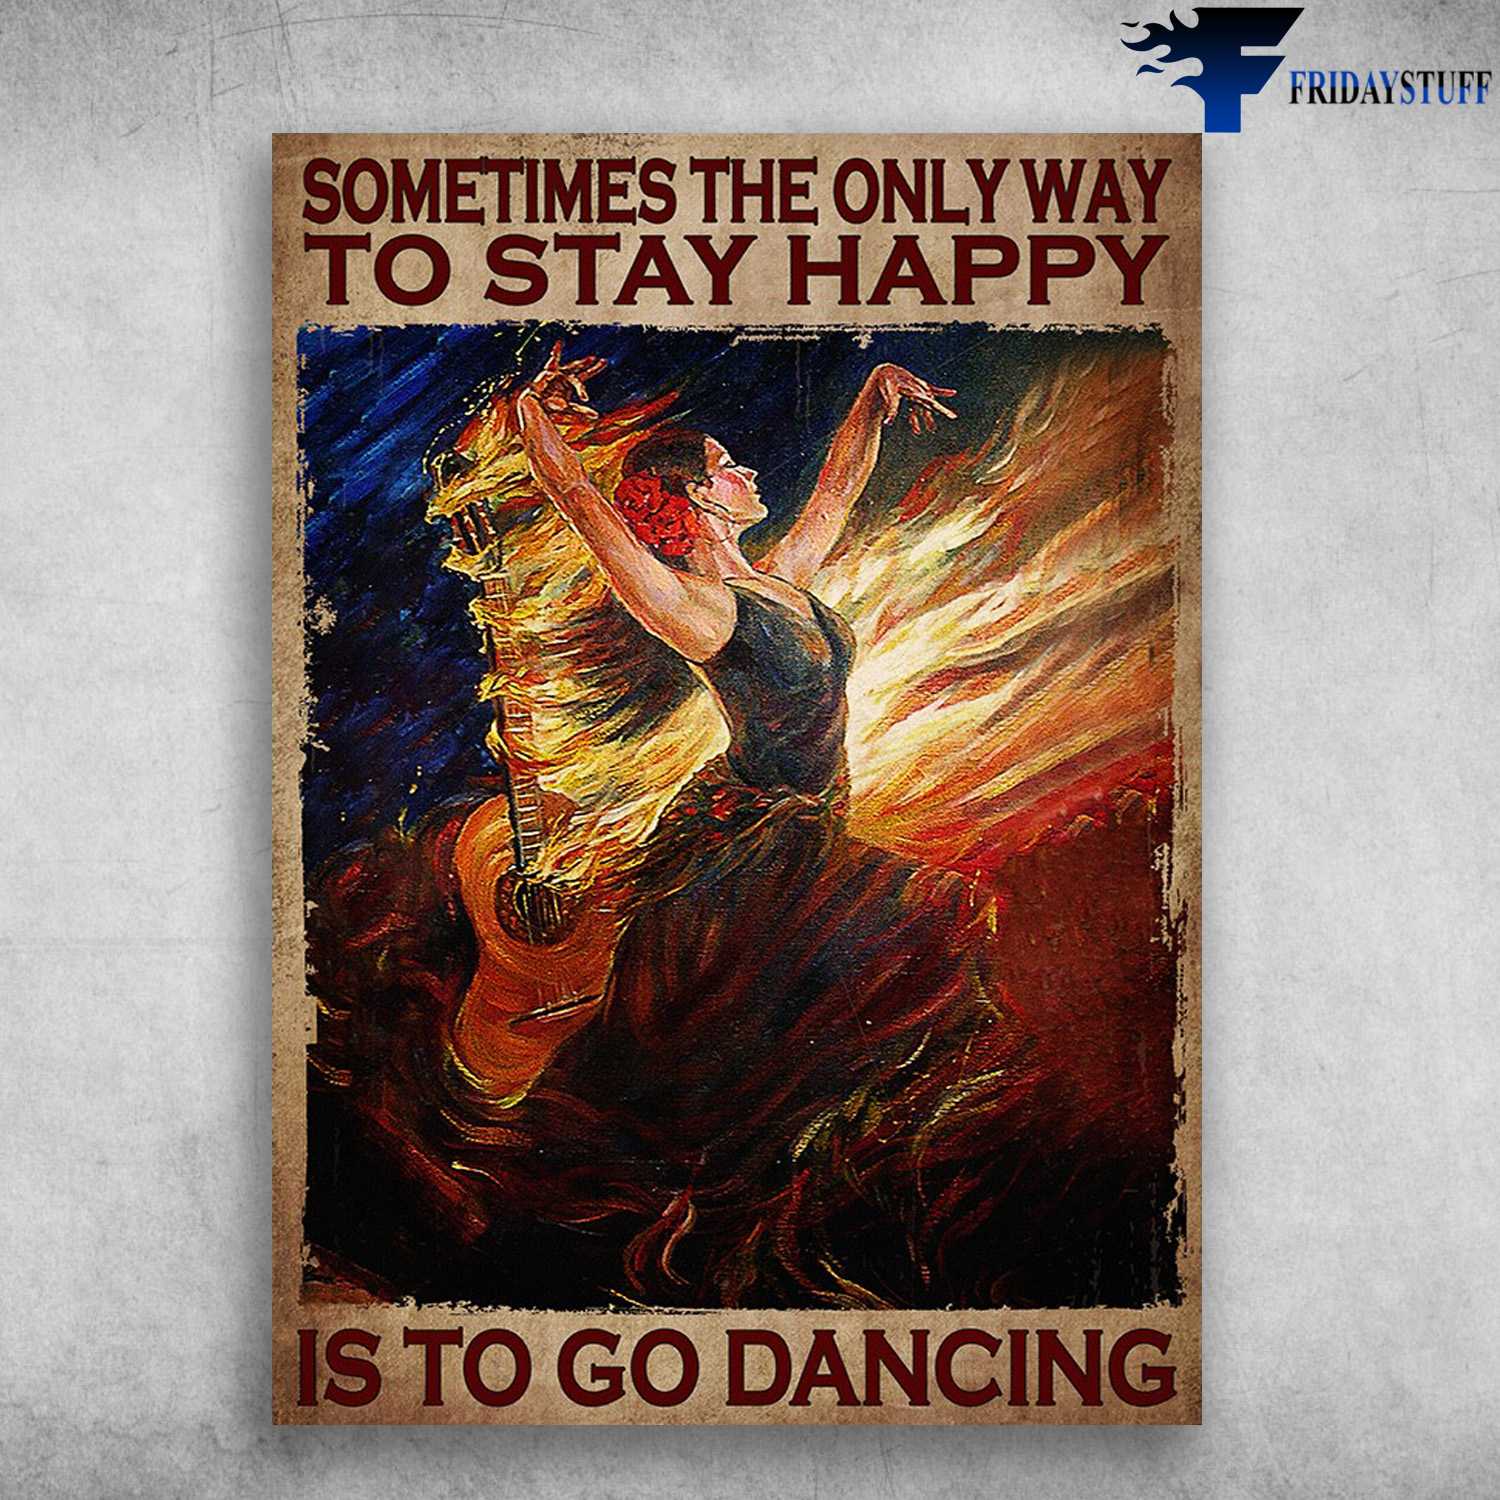 Fire Guitar - Sometimes The Onlyway To Stay Happy, Is To Go Dancing